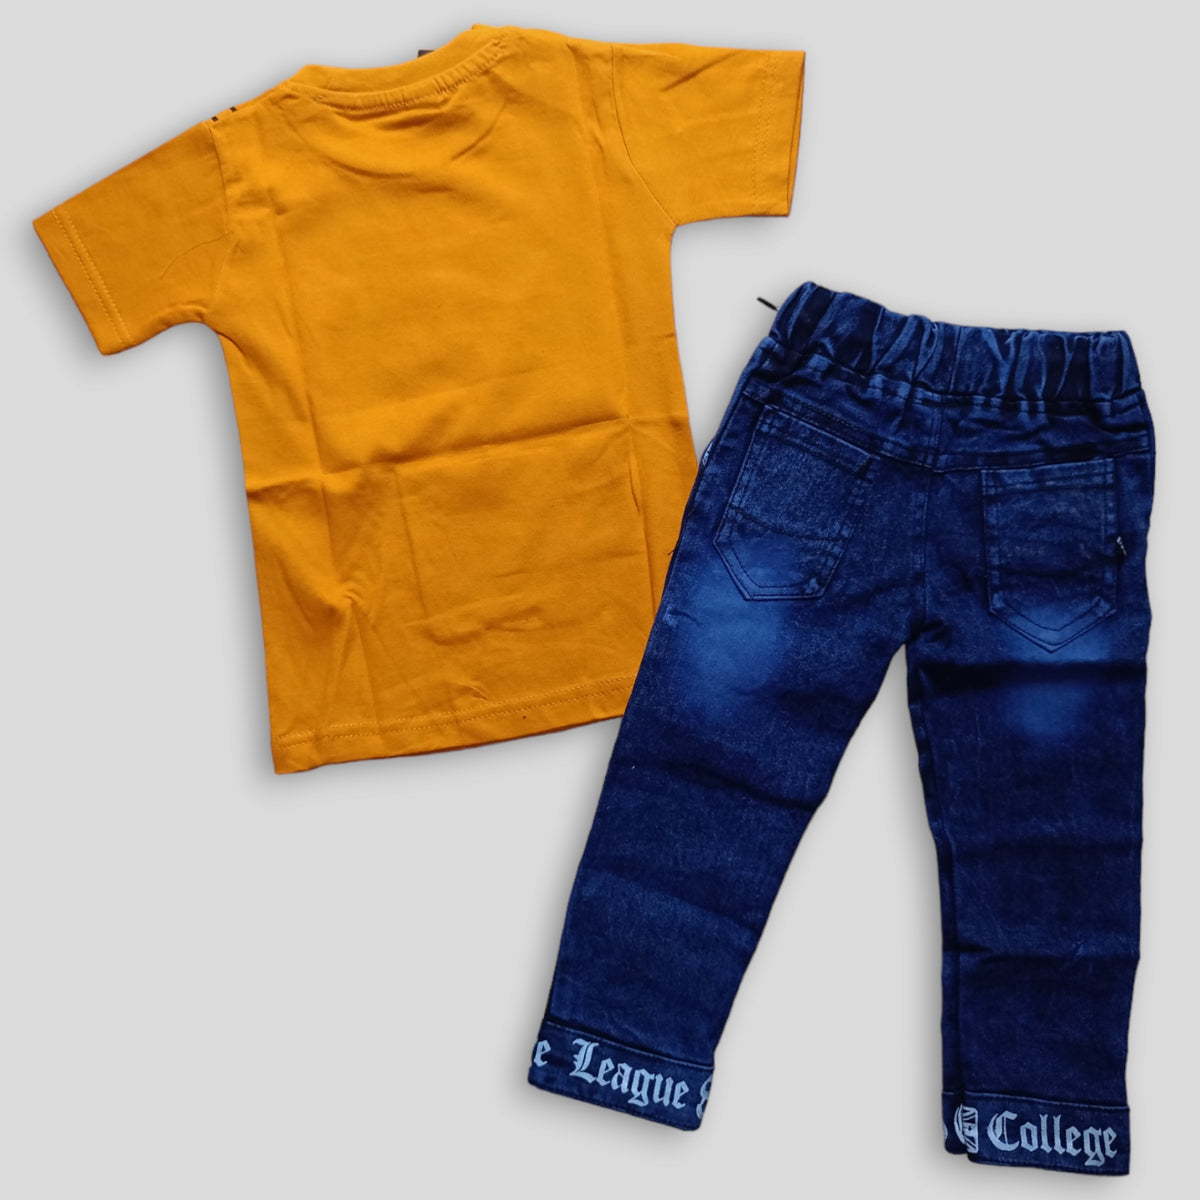 Shine Yellow T-shirt & mike Jeans